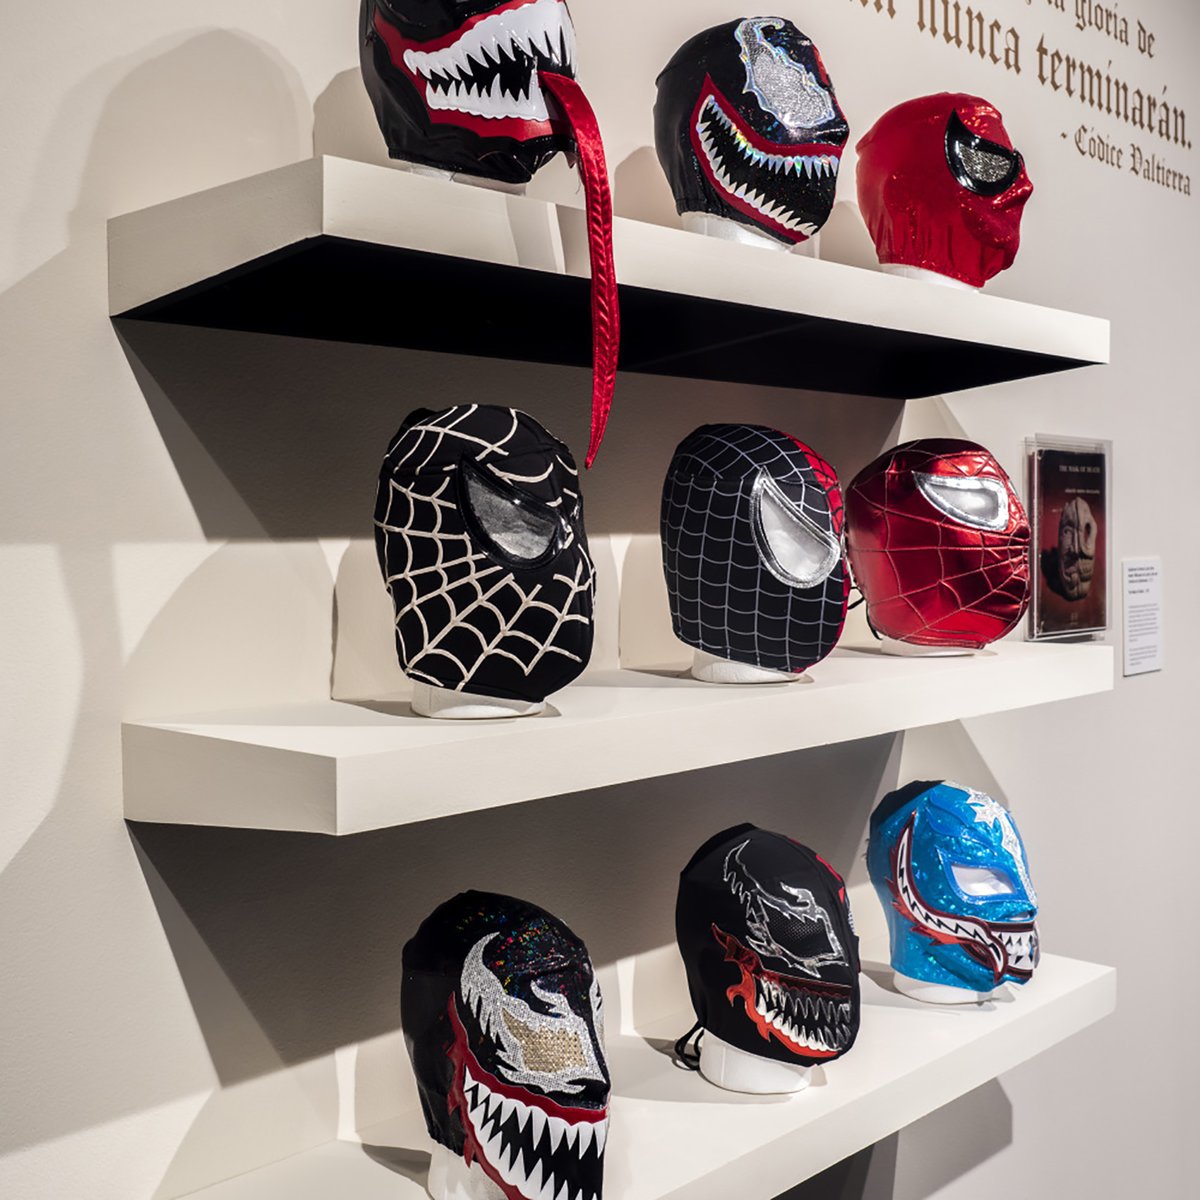 Have you visited the #DesertRider -inspired library installation? As a complement to the exhibition, see books, magazines, a mural, masks, and other ephemera that examine the links between Chicanx lowrider culture to its Mexican and ancient Latin American roots. Closing on Sunday